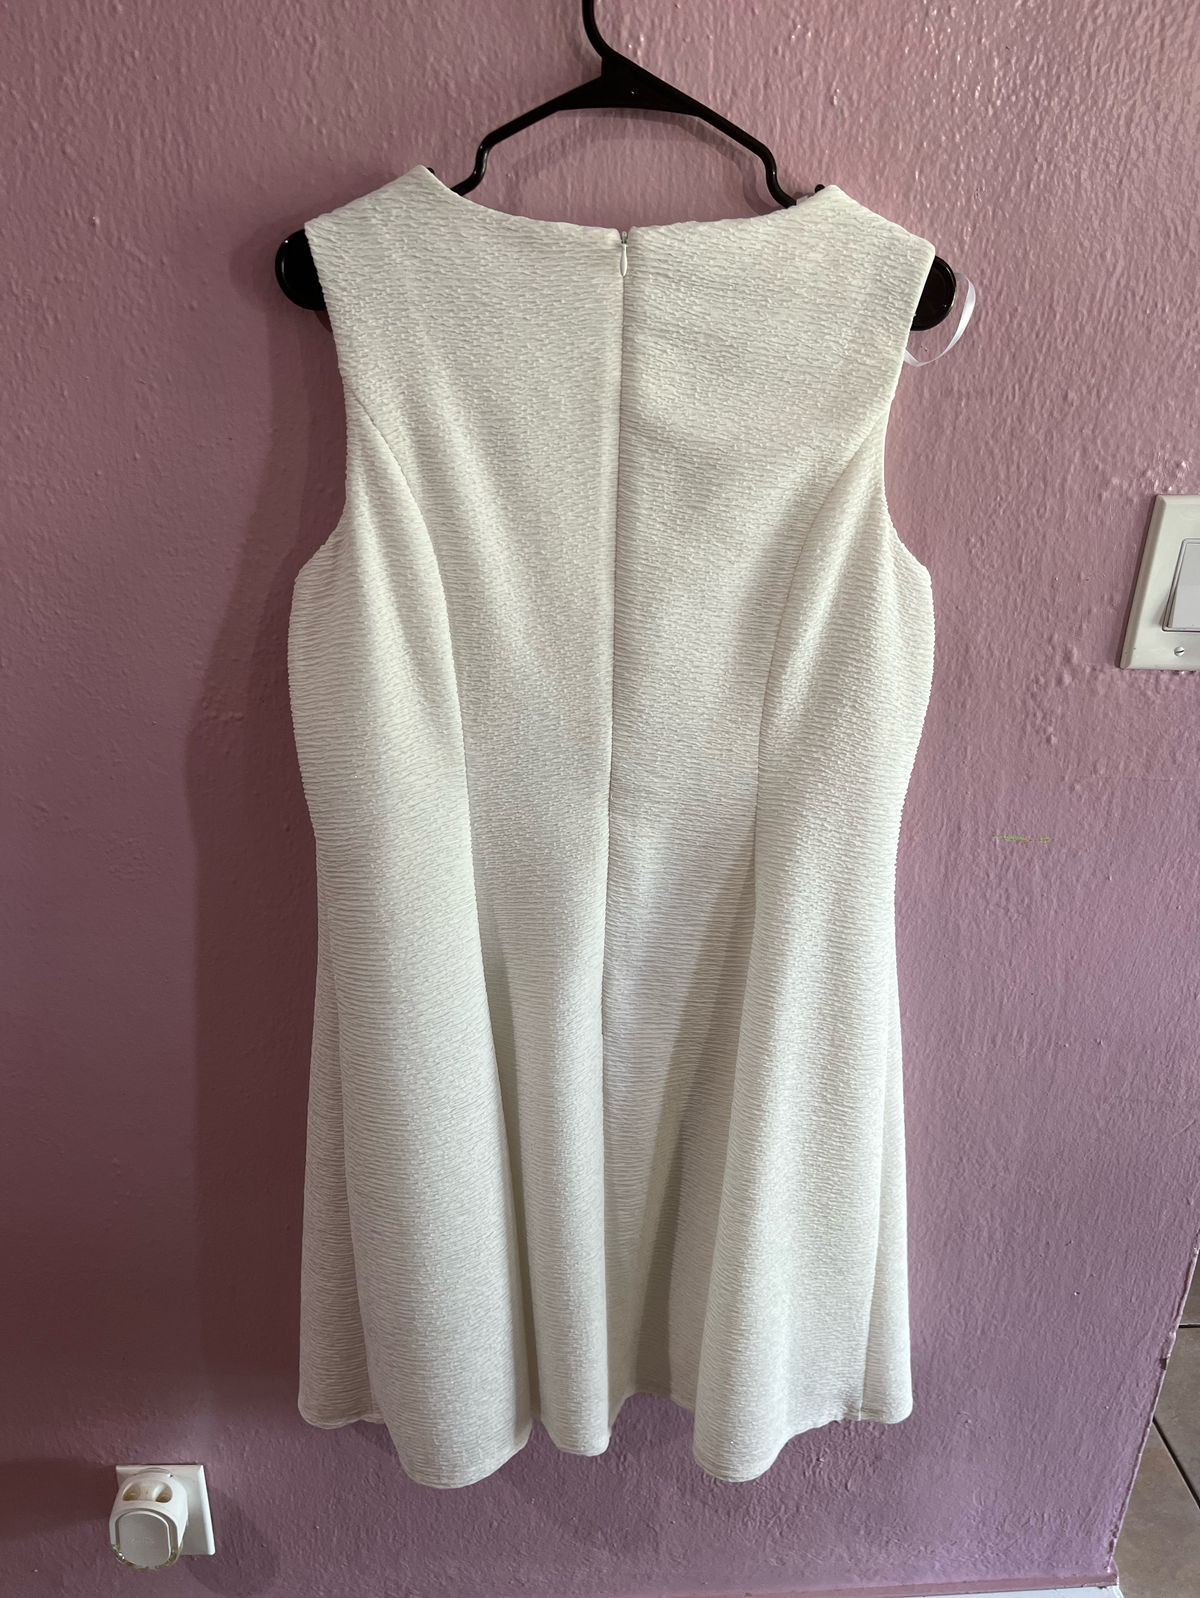 Guess Plus Size 16 High Neck White Cocktail Dress on Queenly